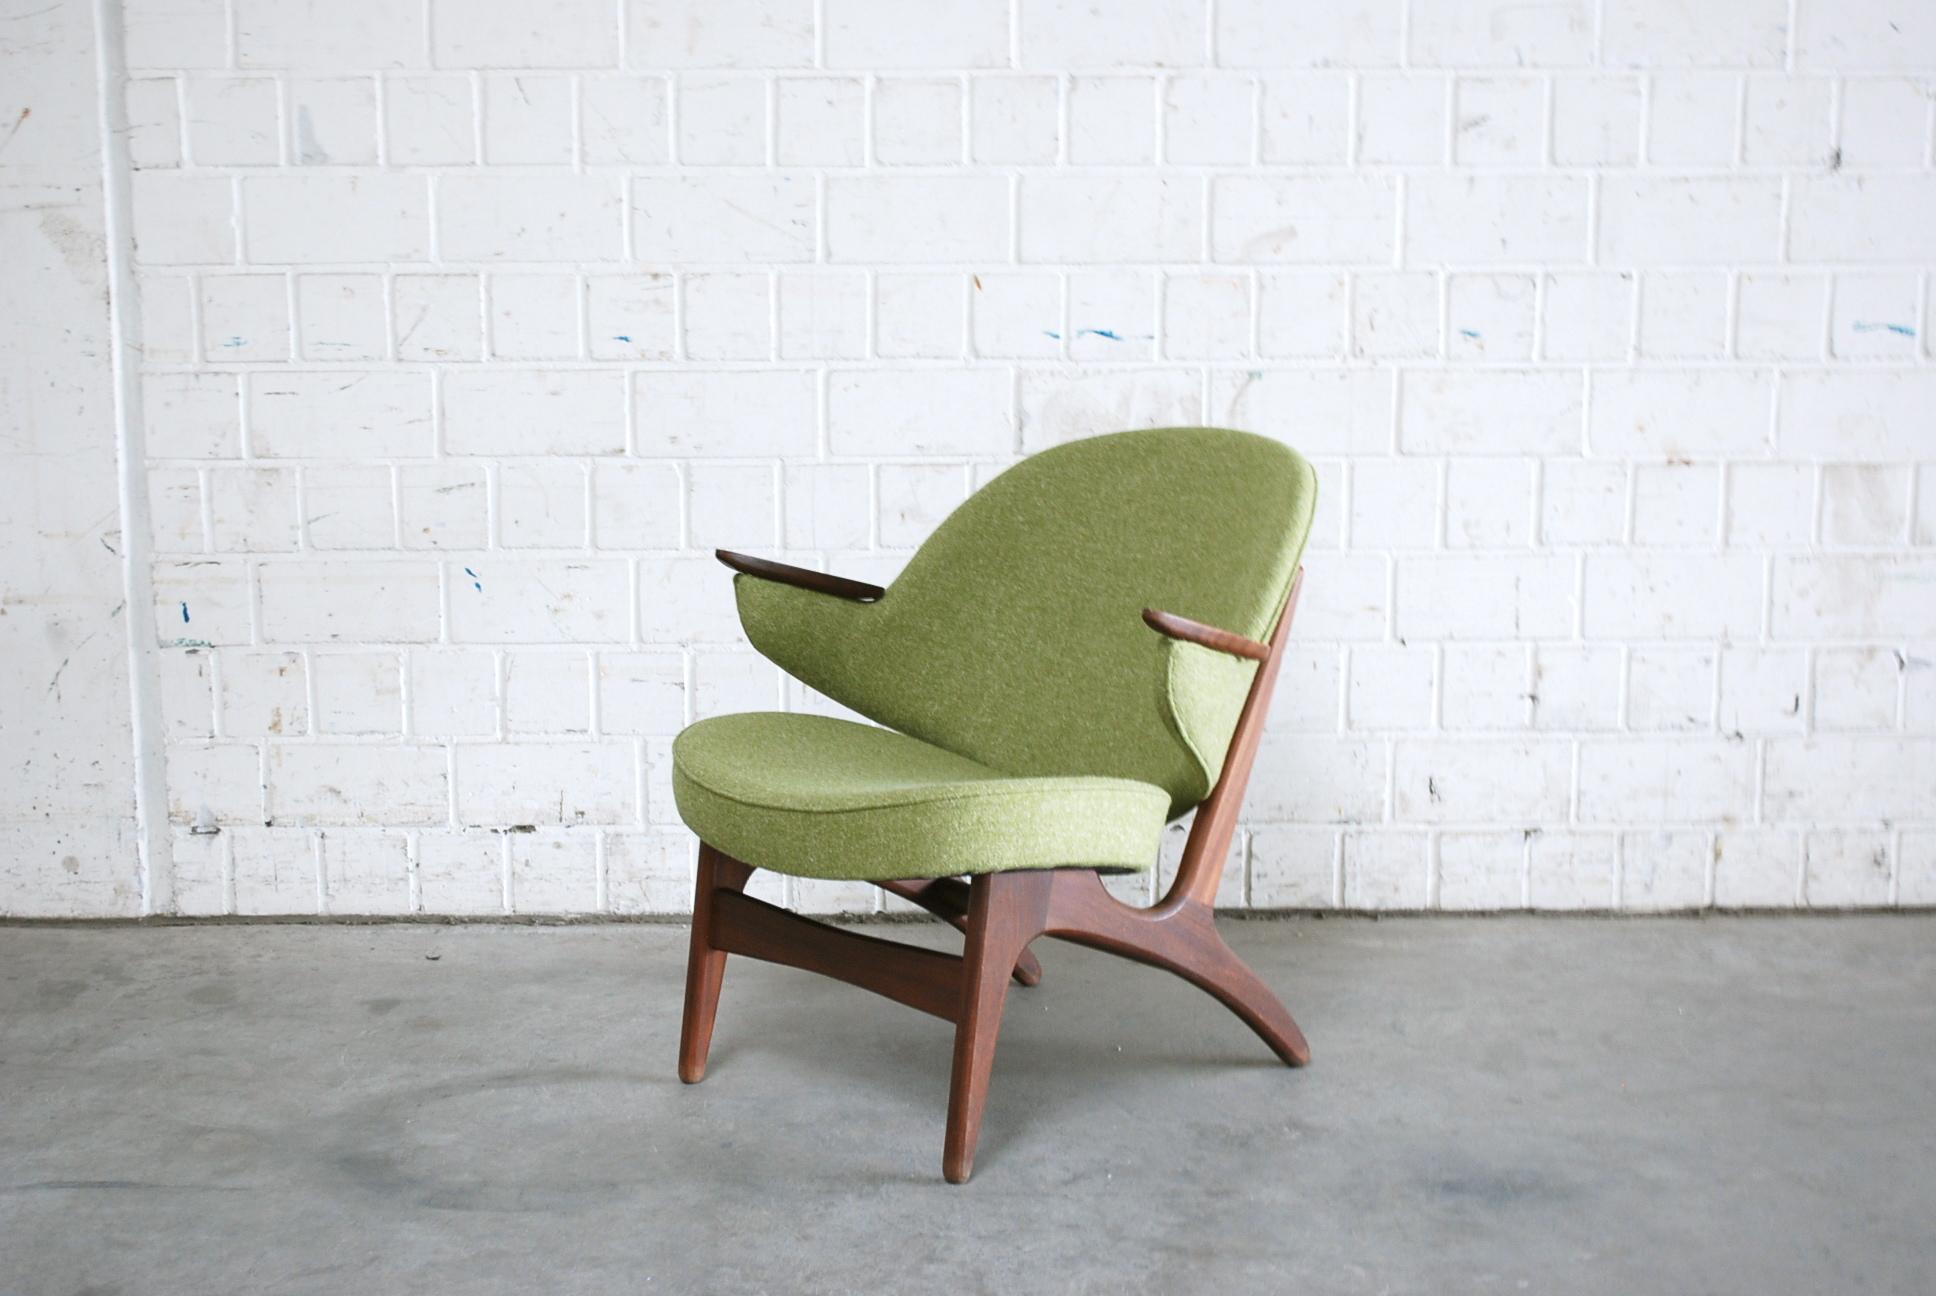 Carl Edward Matthes Pair of Danish Modern Easy Lounge Chair, 1960s For Sale 6